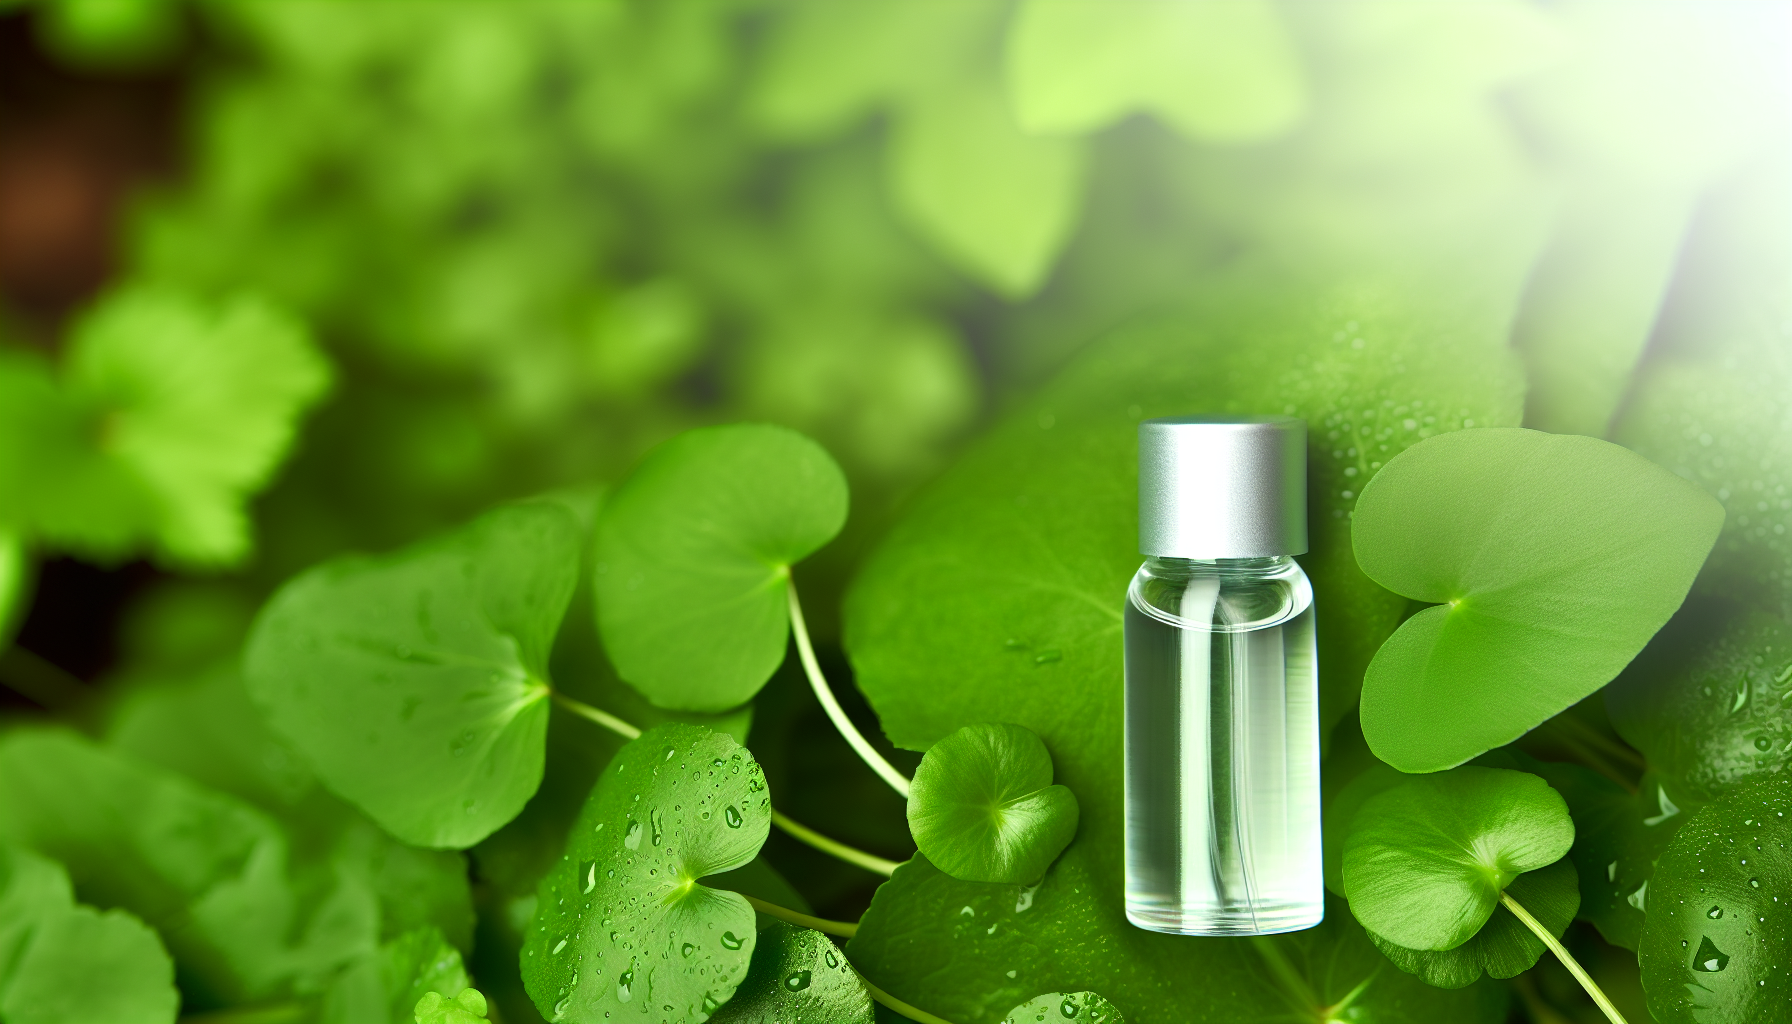 Bottle of Centella Asiatica extract surrounded by green leaves